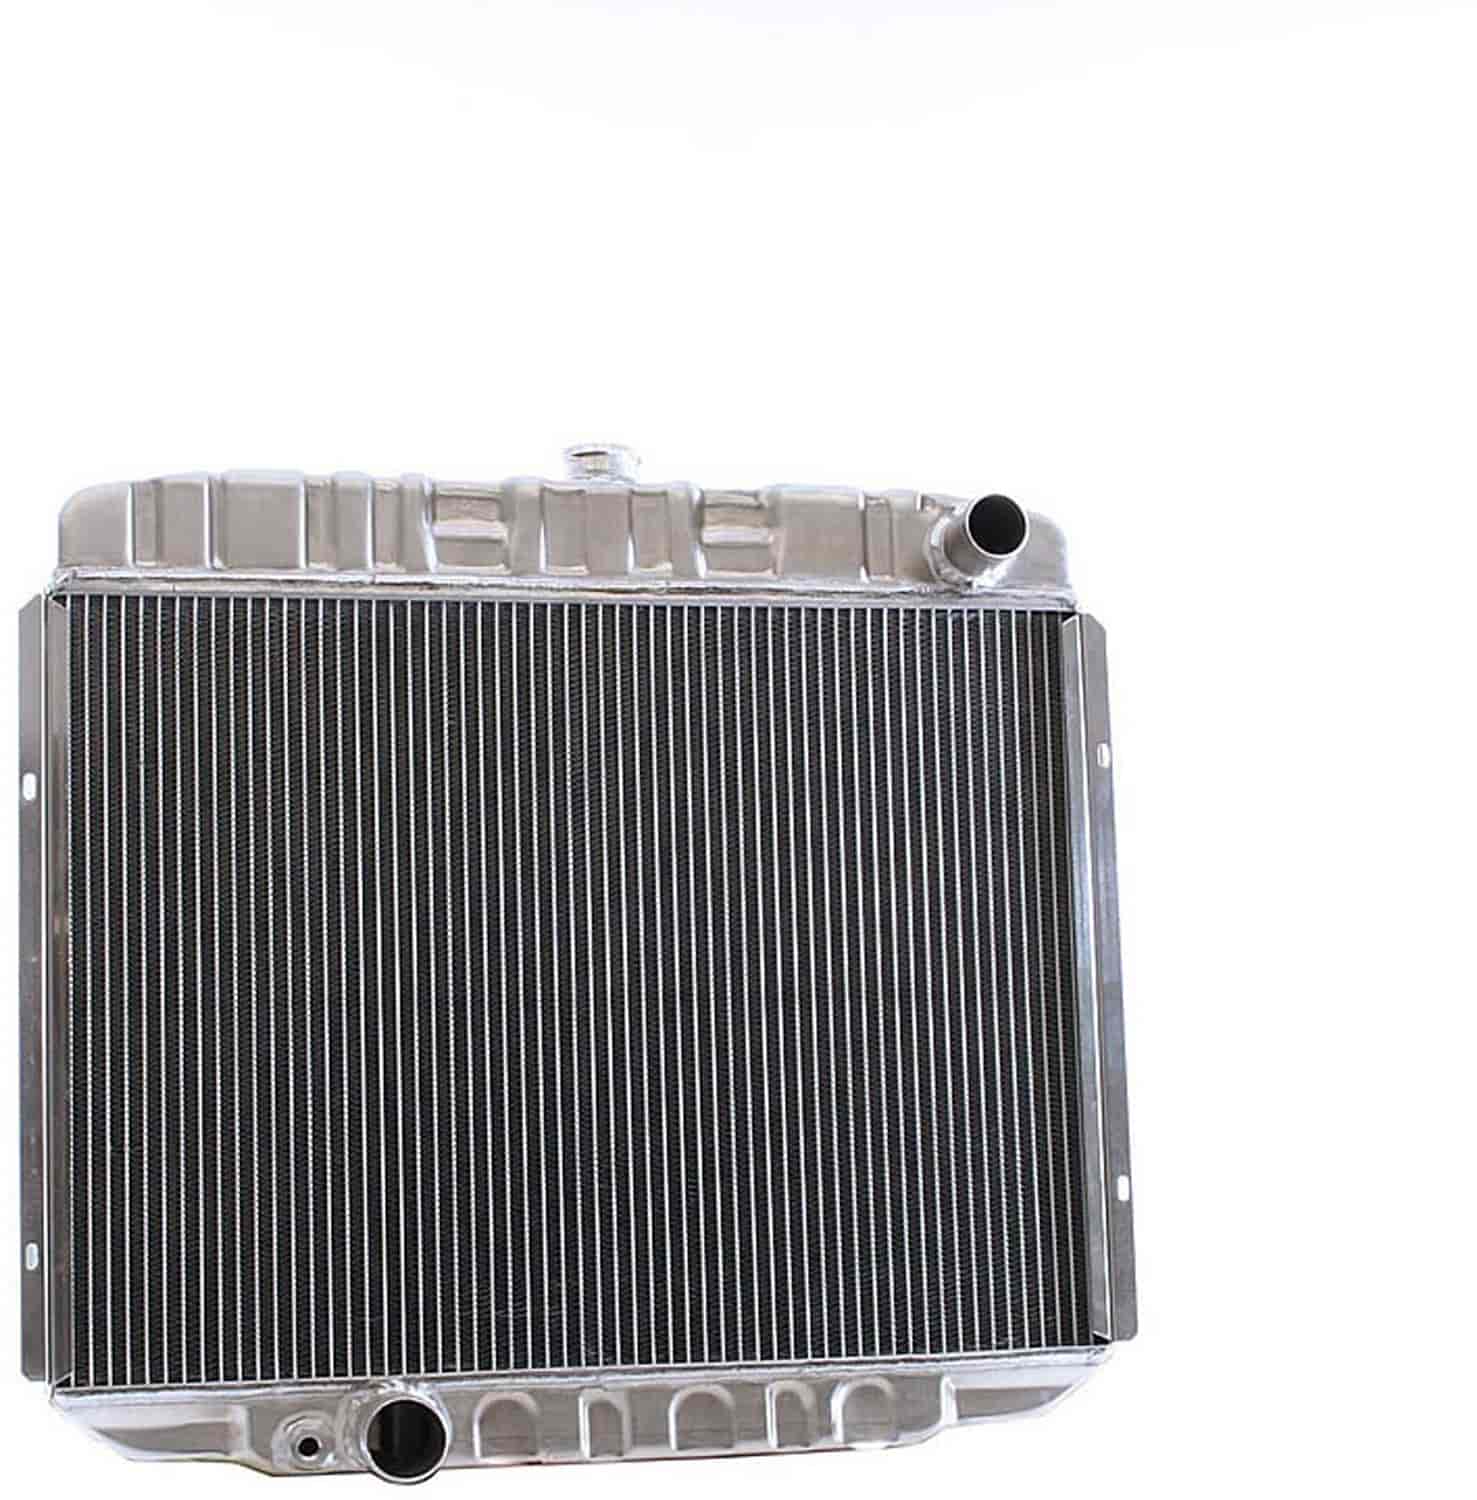 ExactFit Radiator for 1968 Ford Torino with Late